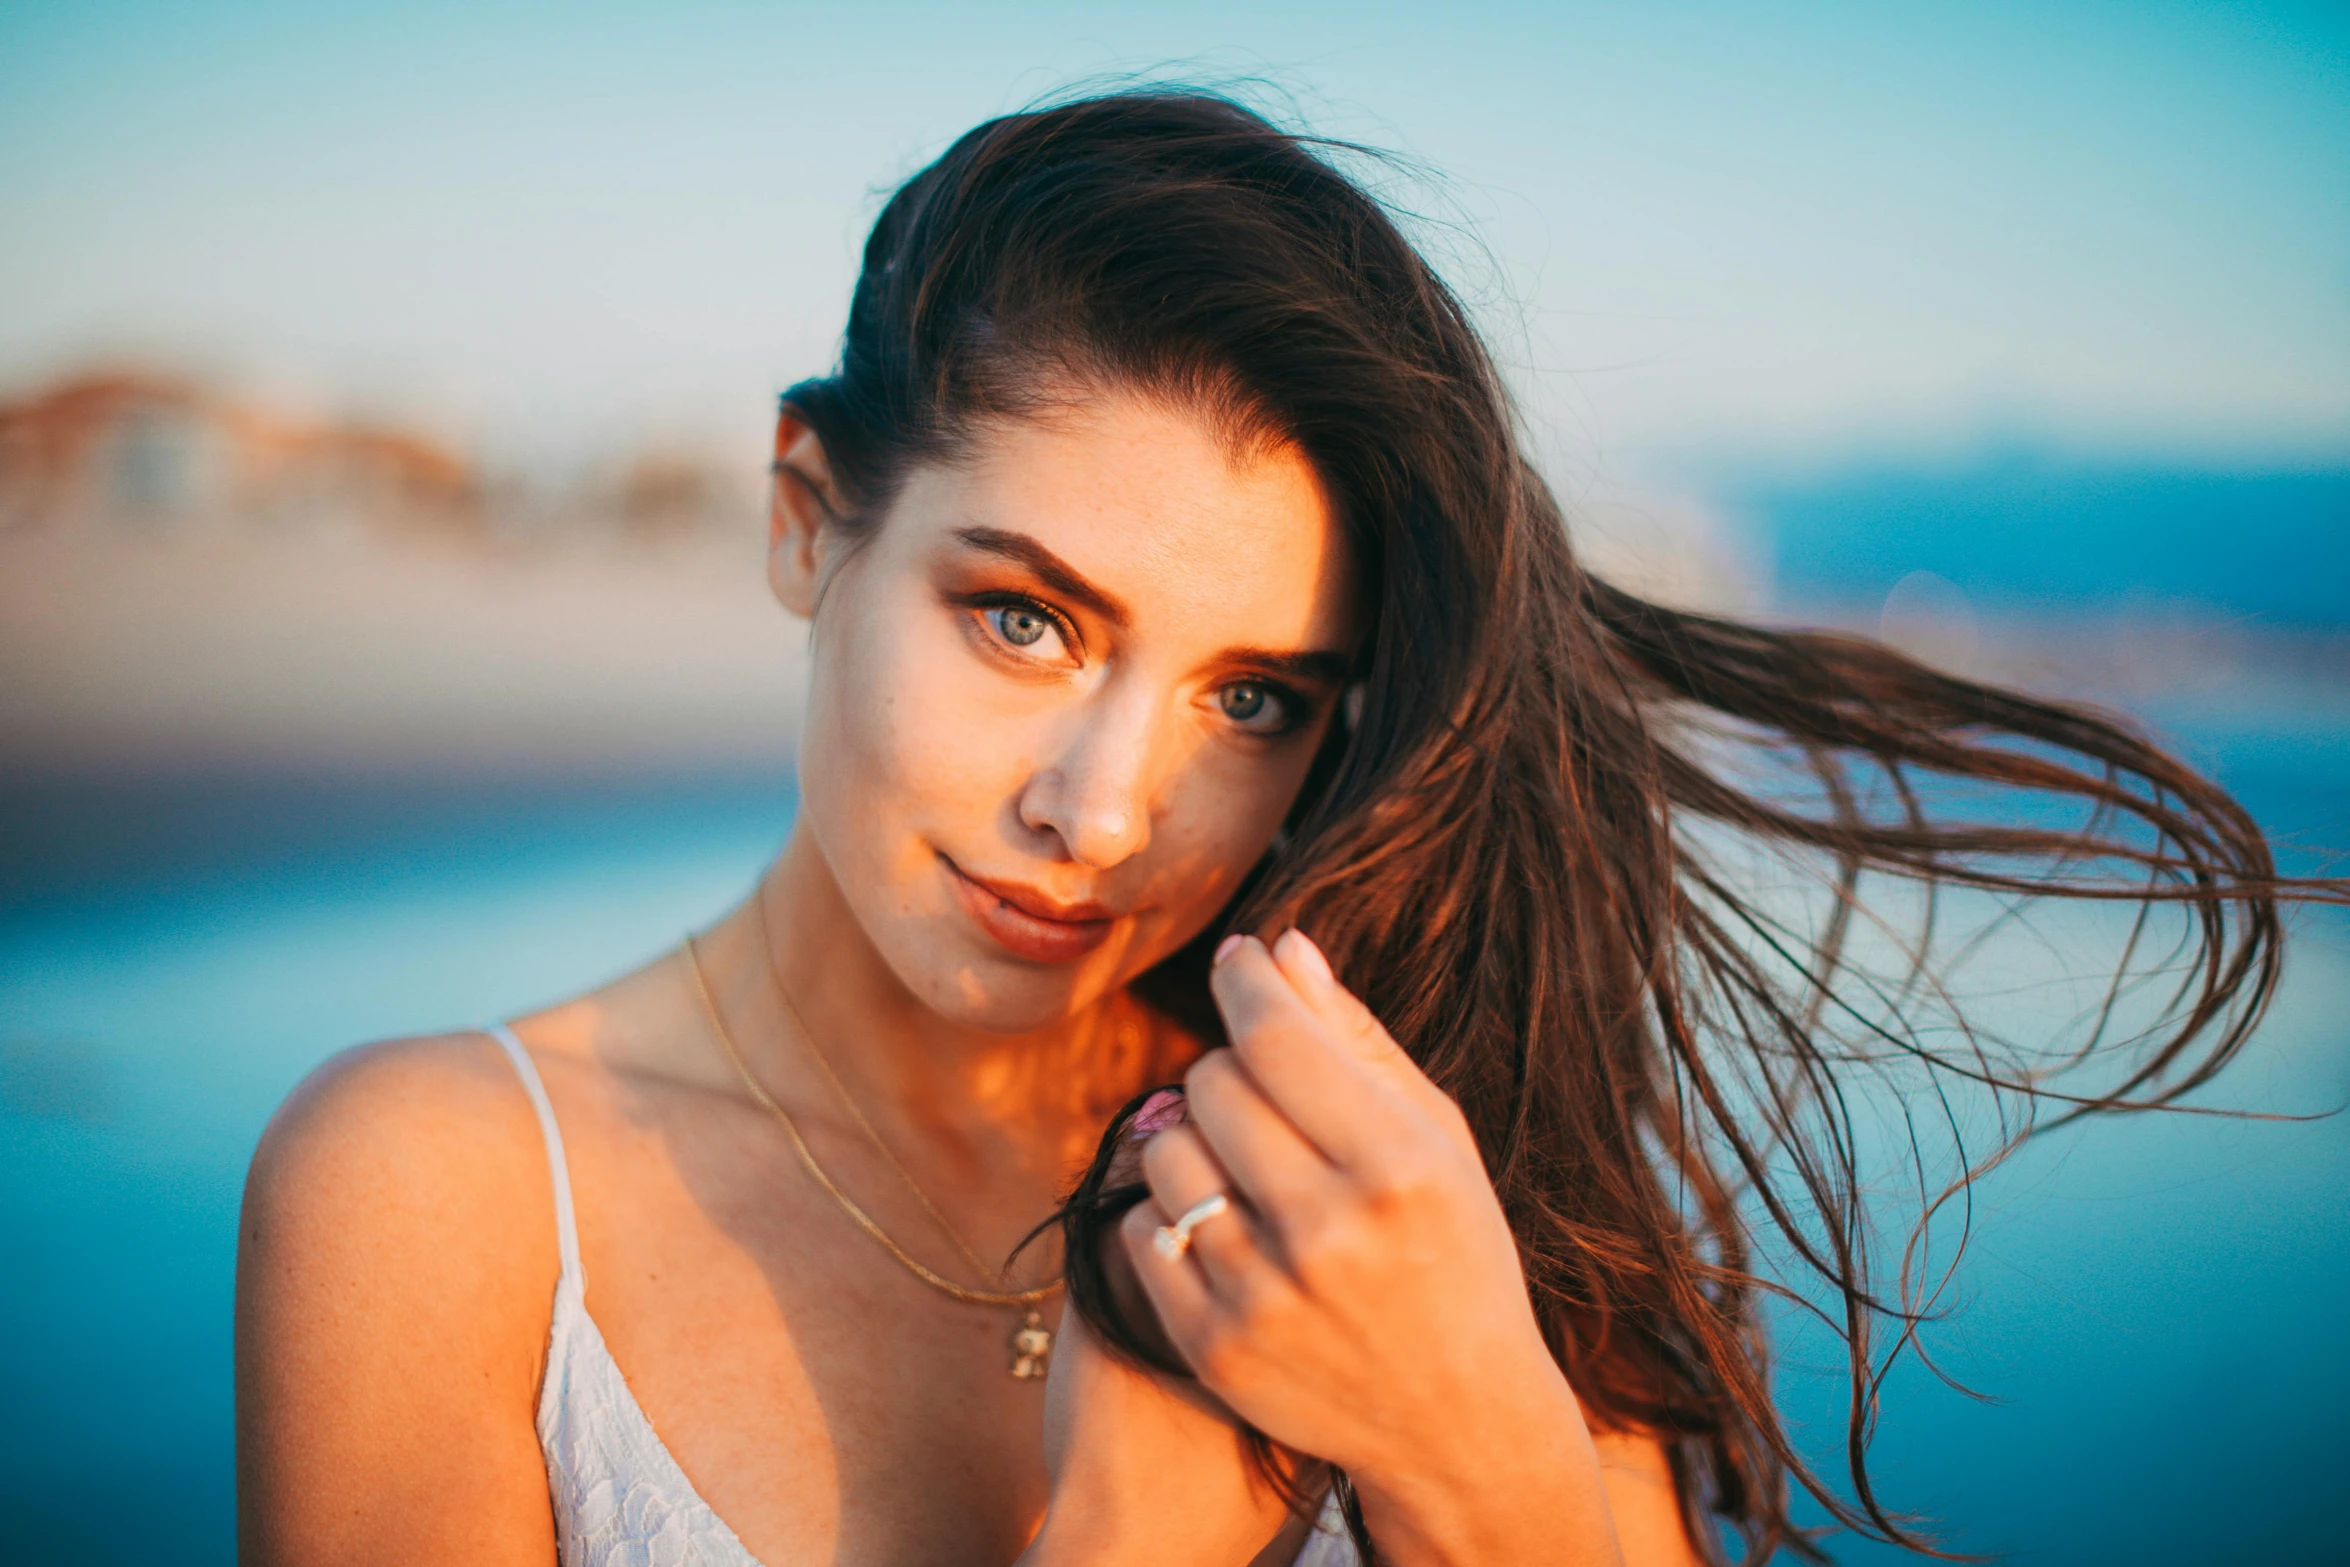 a beautiful young woman standing next to a body of water, by Julia Pishtar, pexels contest winner, tachisme, attractive facial features, :: madison beer, natalia dyer, at a beach